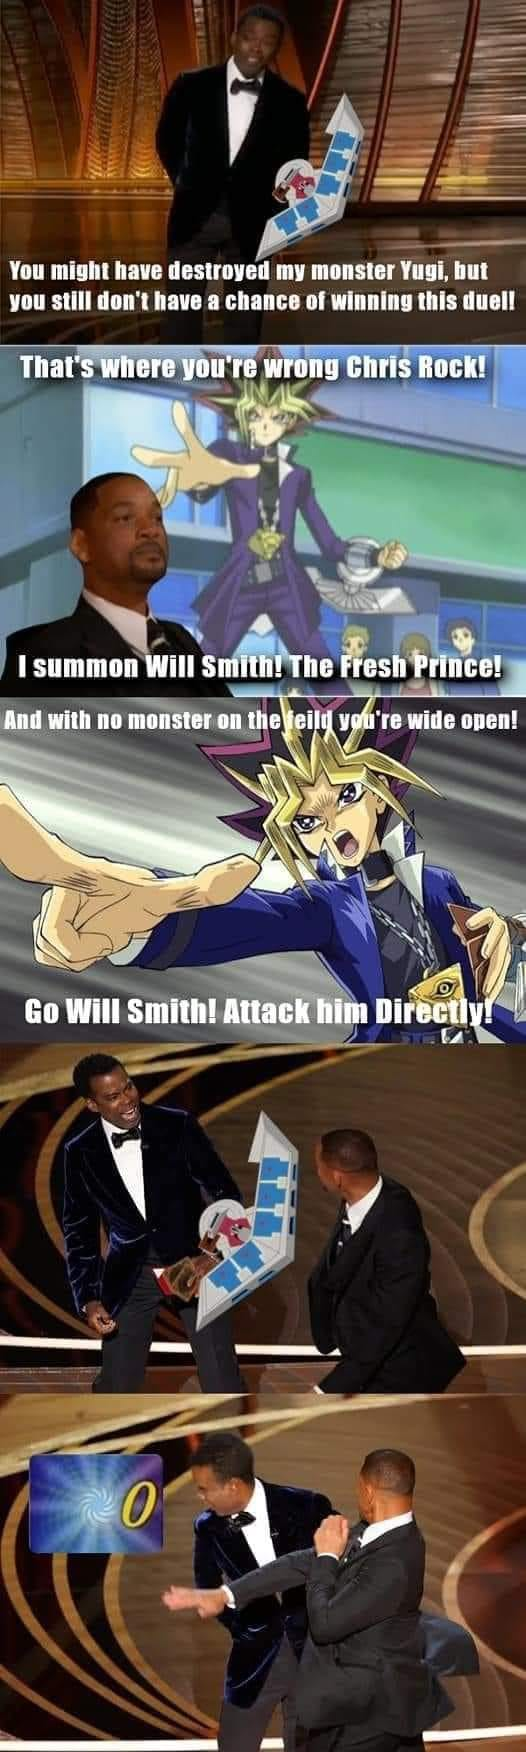 The King of Games and his Fresh Prince